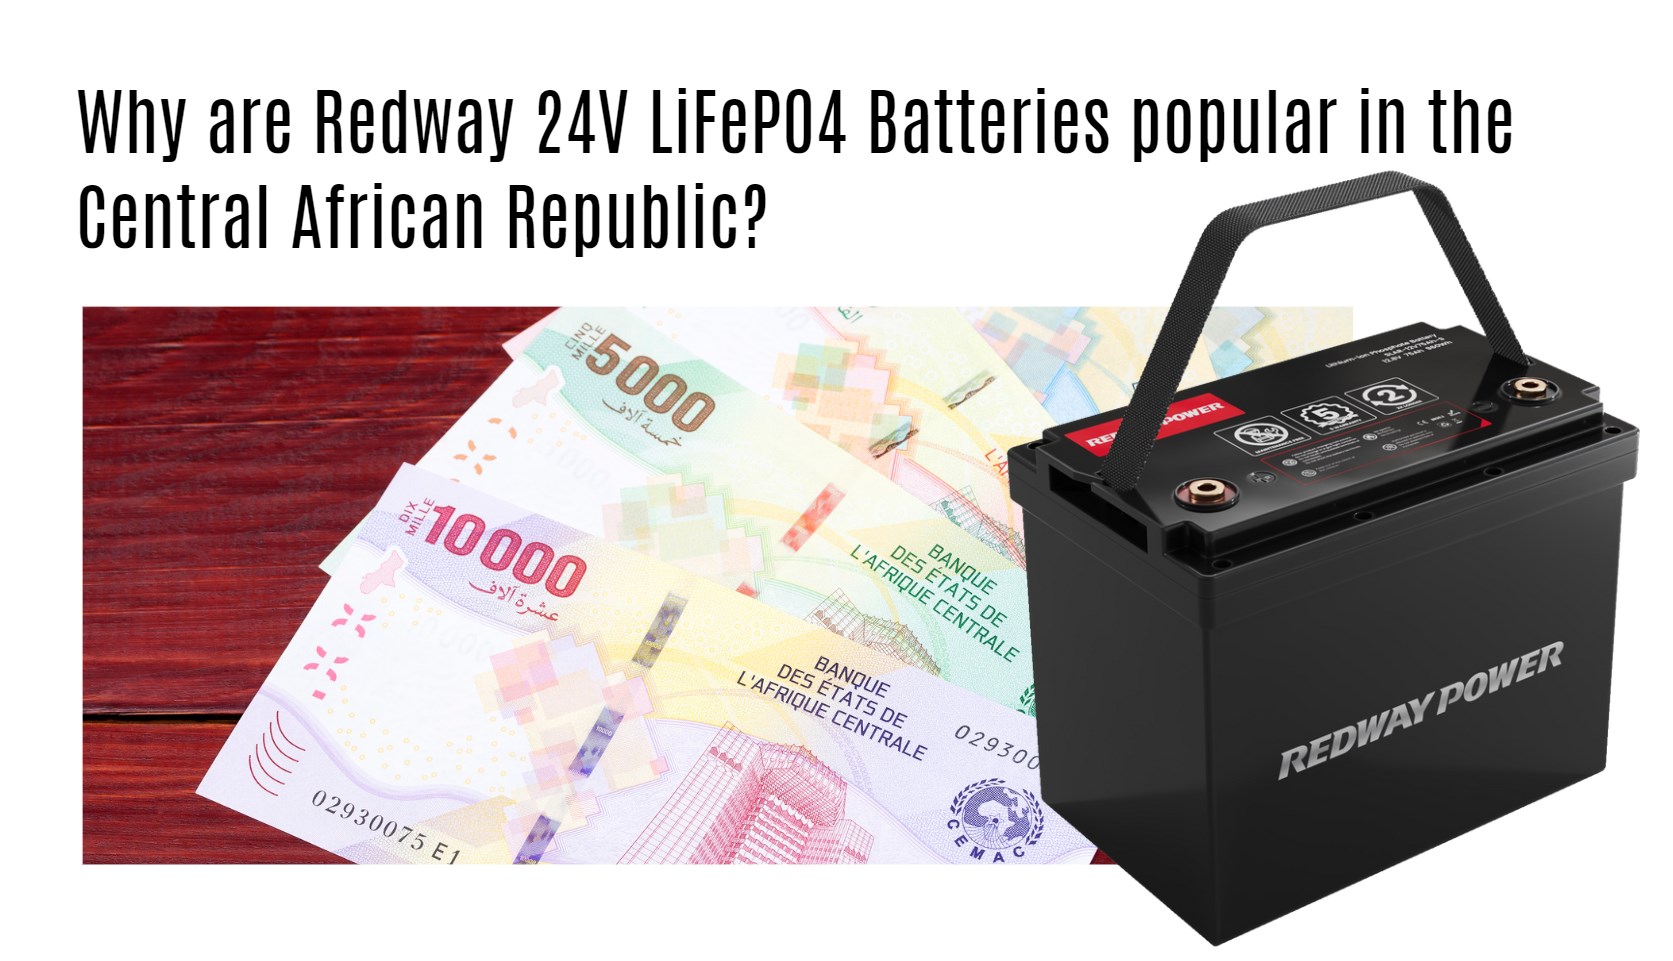 Why are Redway 24V LiFePO4 Batteries popular in the Central African Republic?